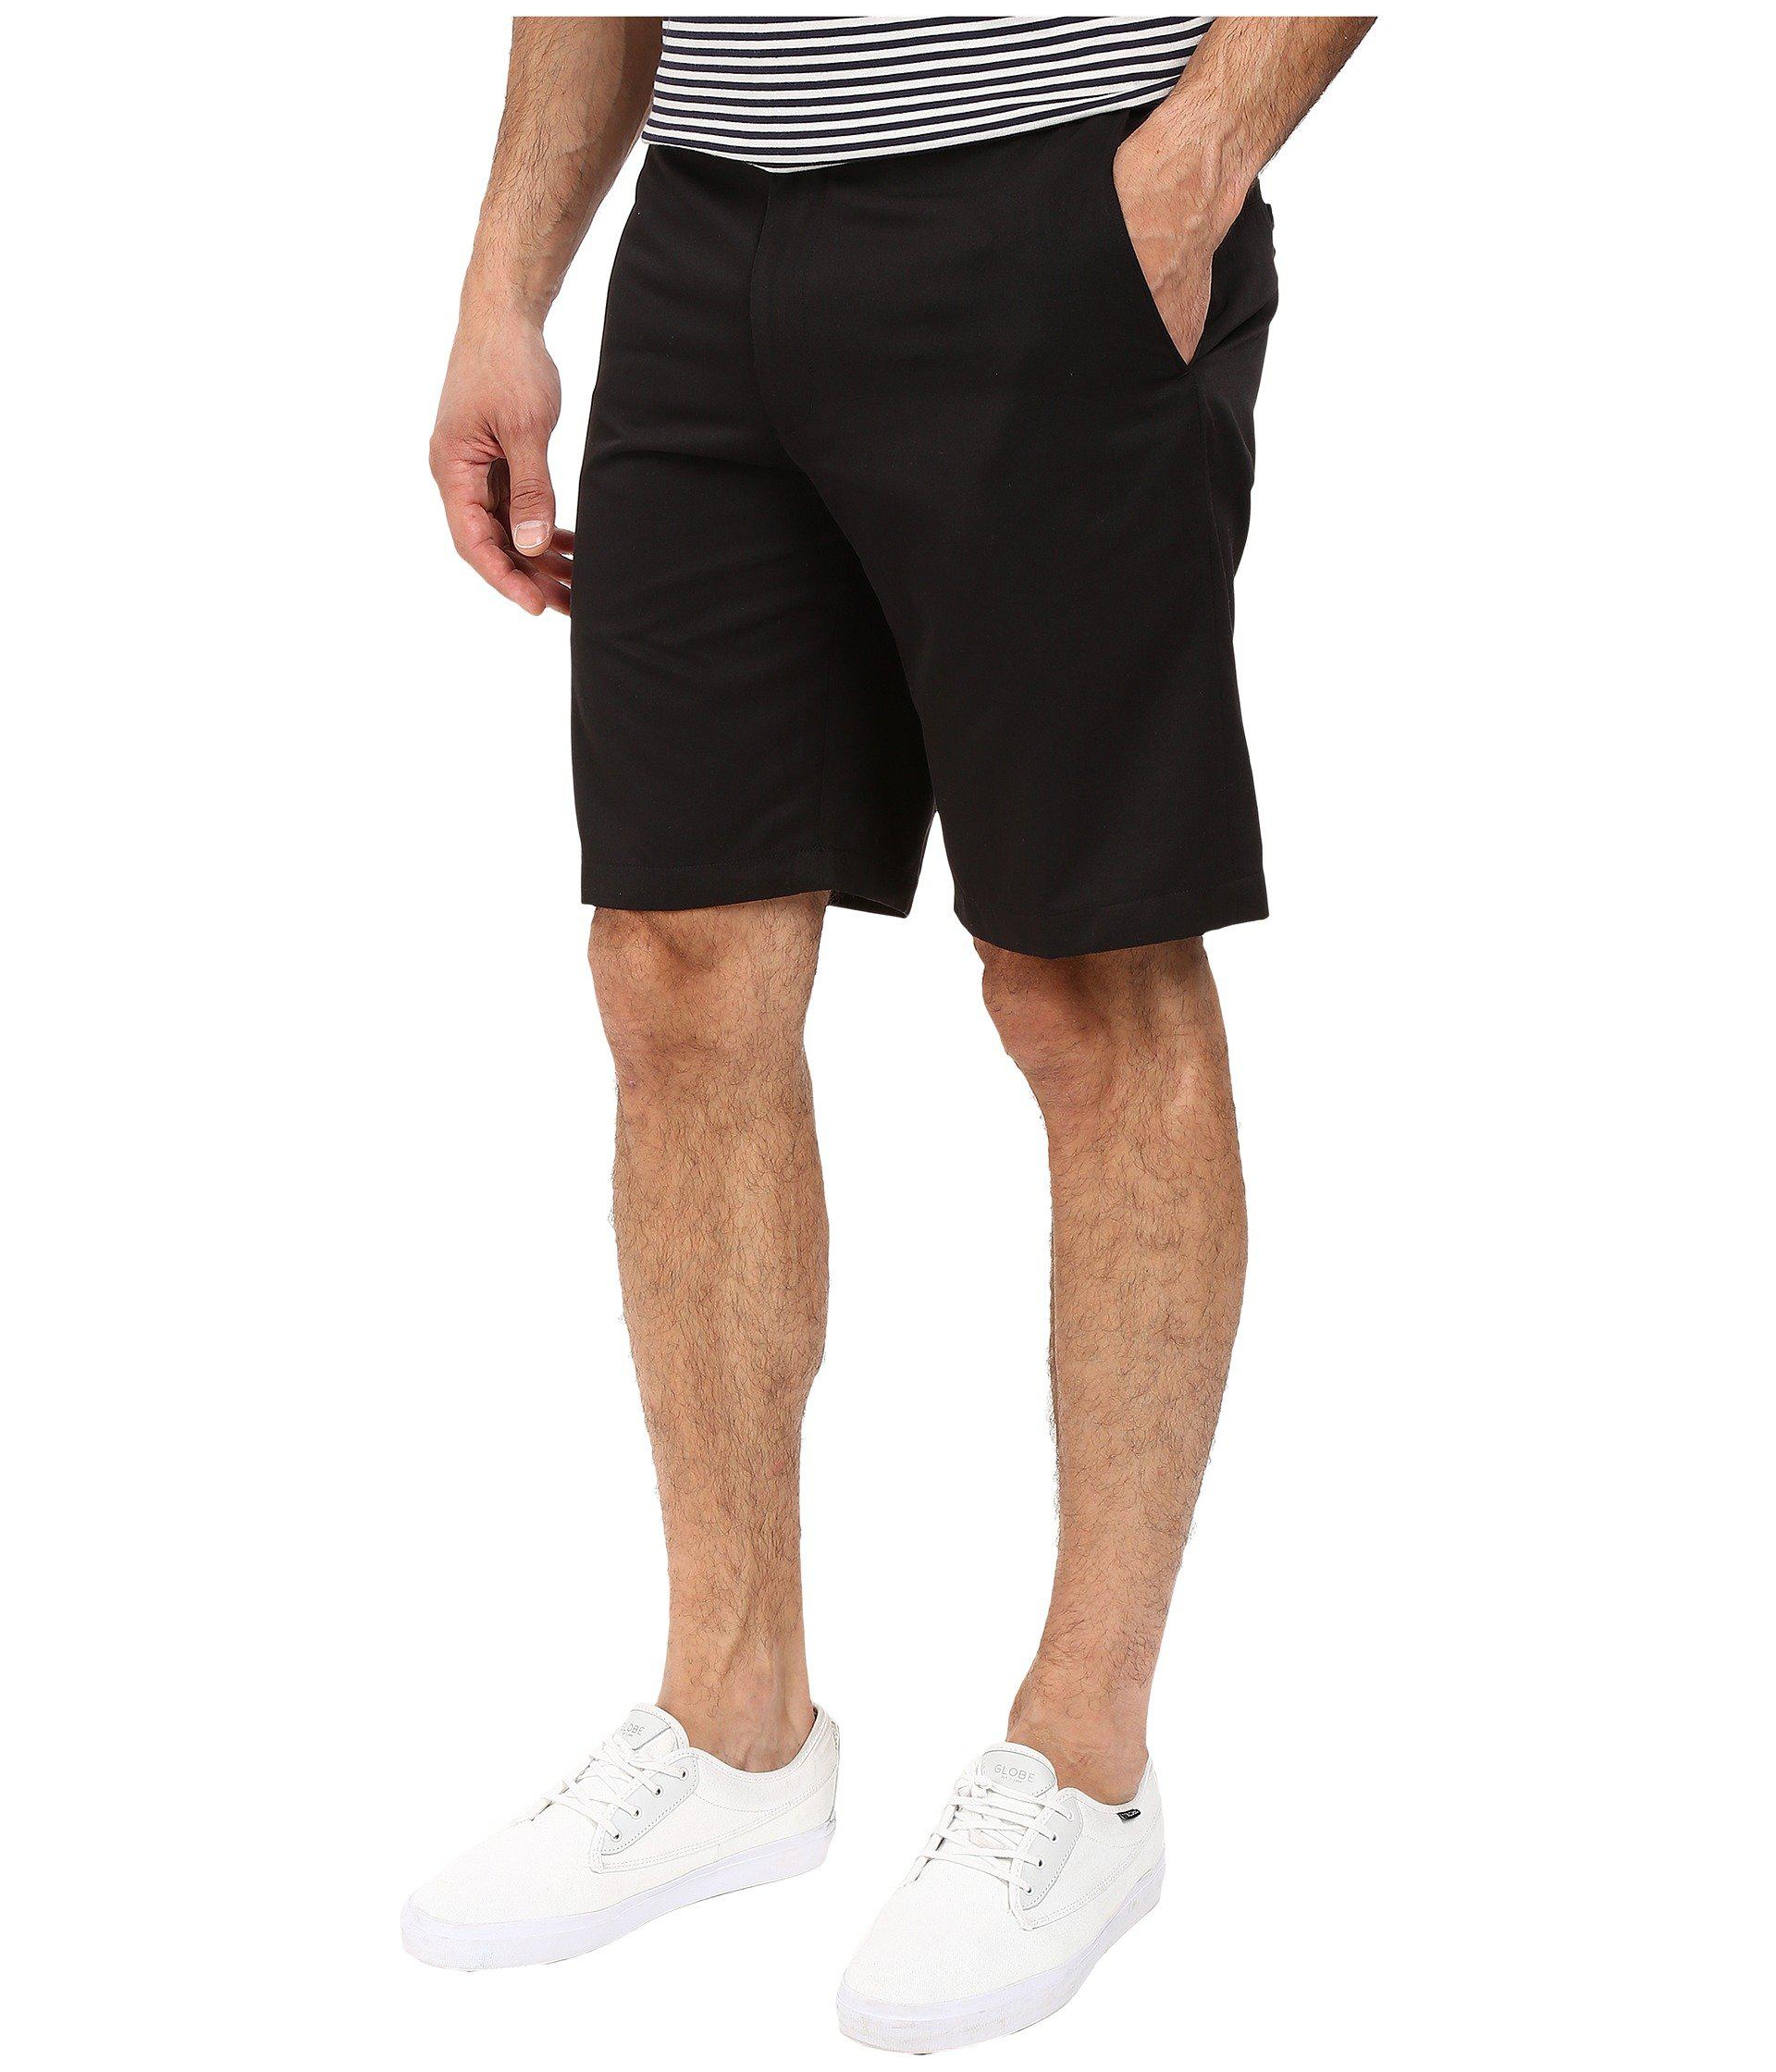 Perry Ellis Portfolio Synthetic Performance Shorts in Black for Men - Lyst